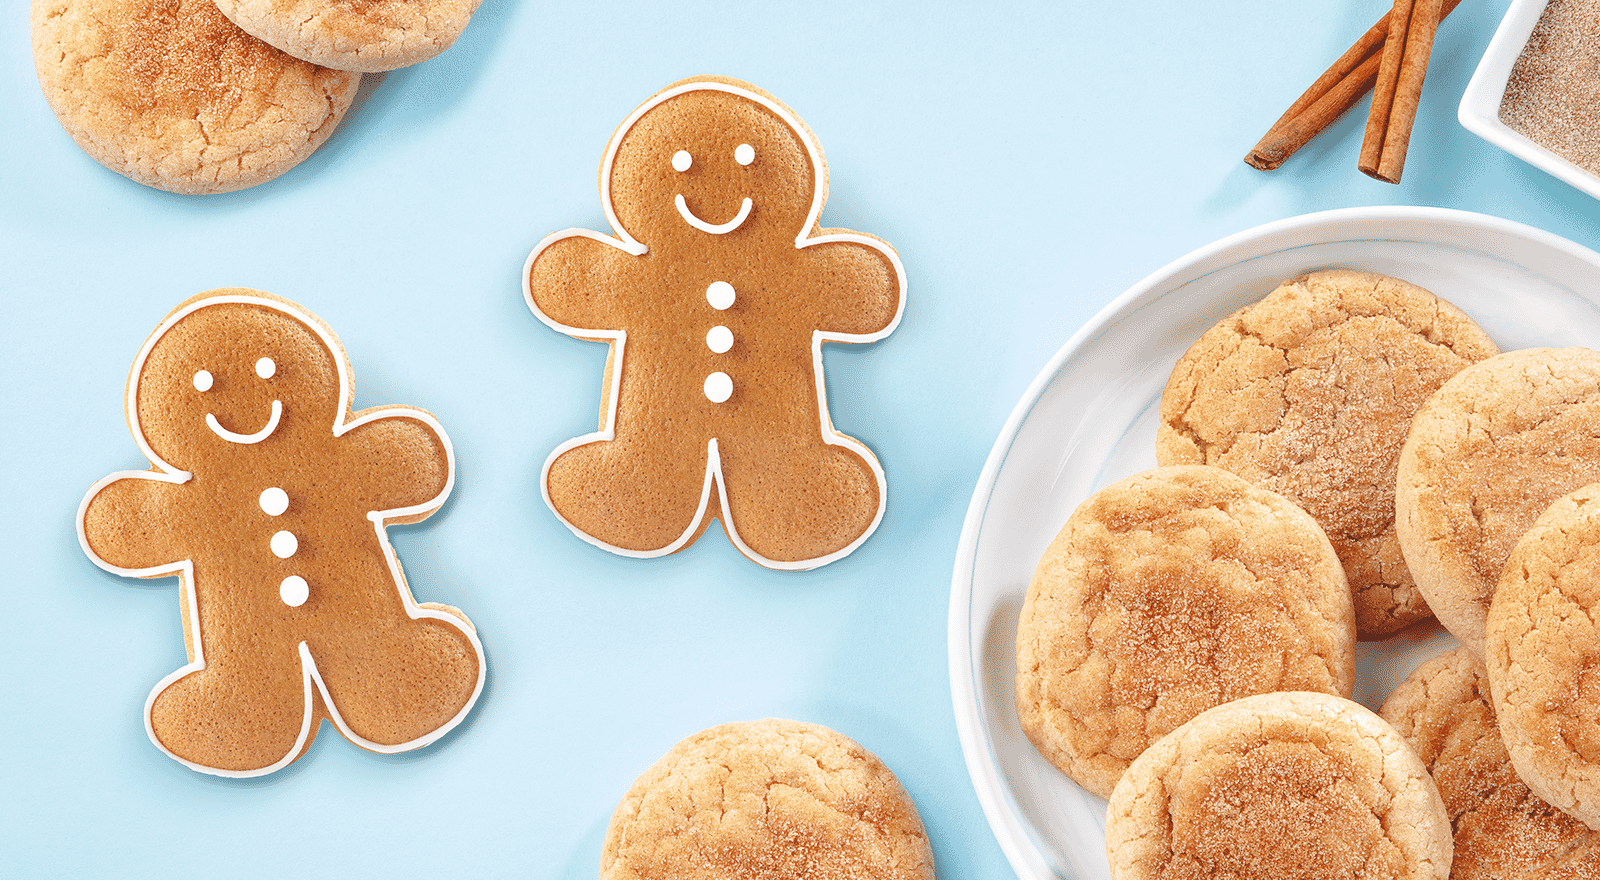 Gingerbread and Snickerdoodle cookies